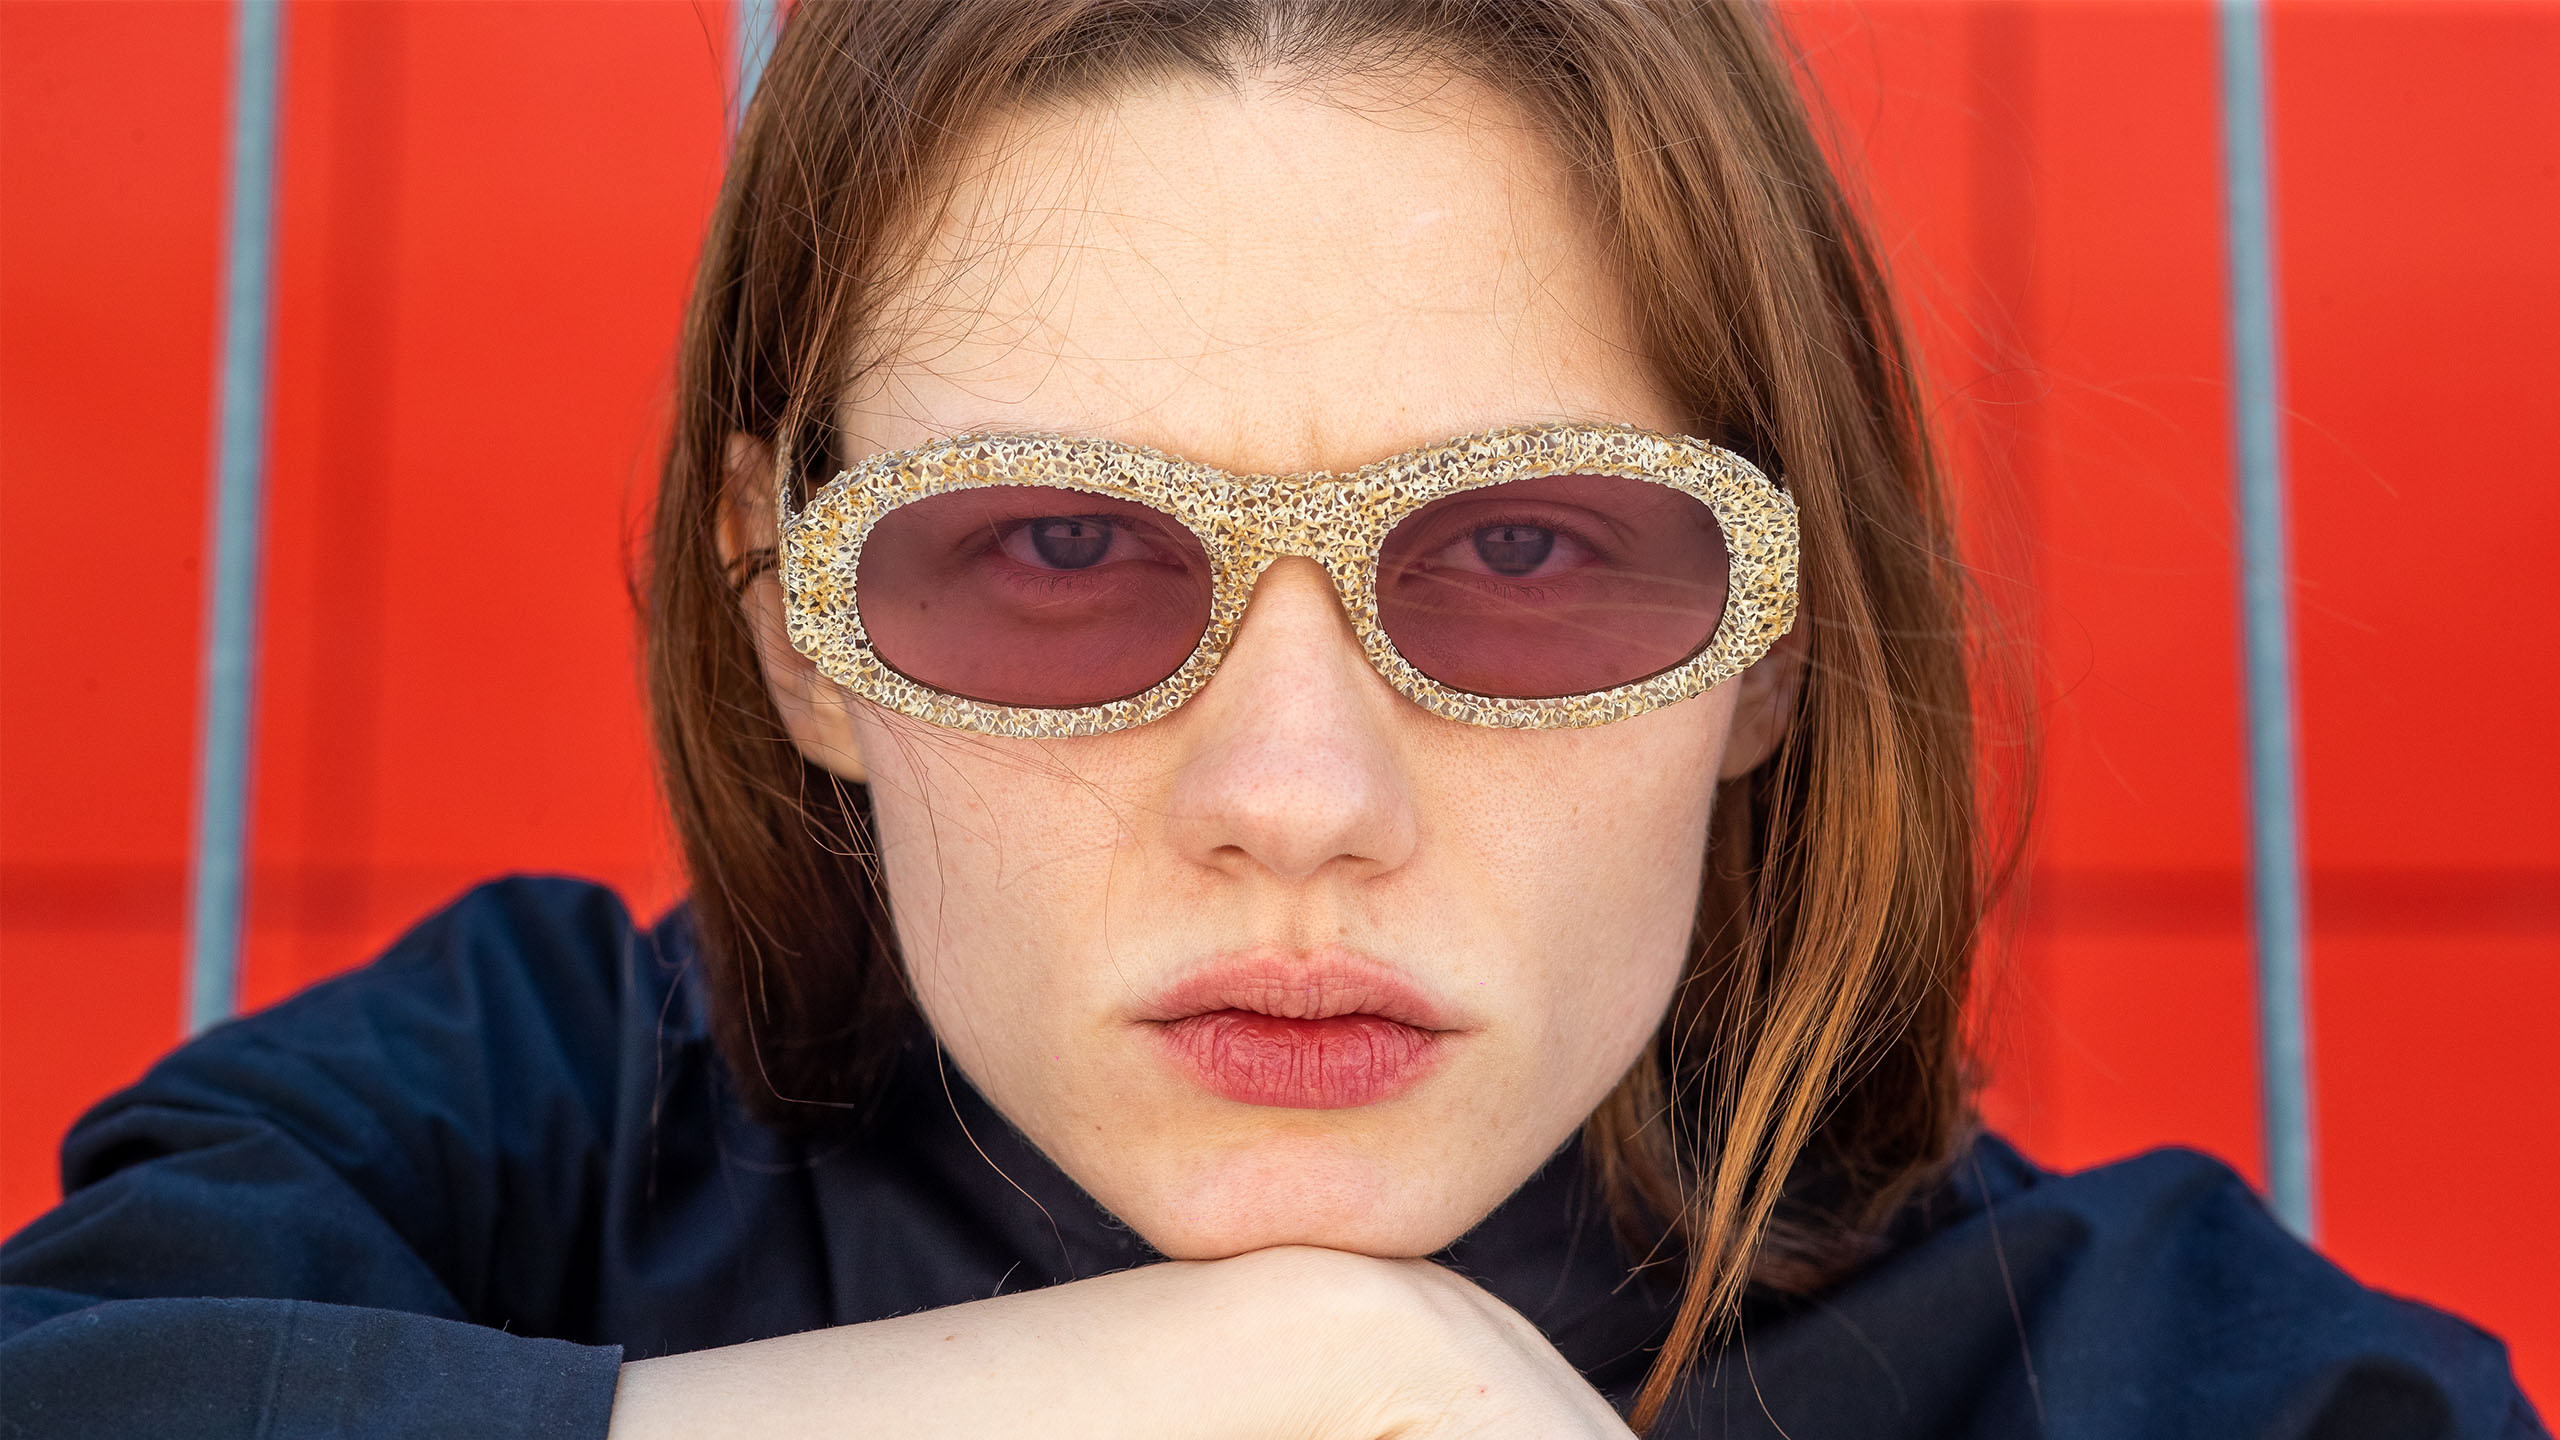 The indie eyewear brands setting their sights on success